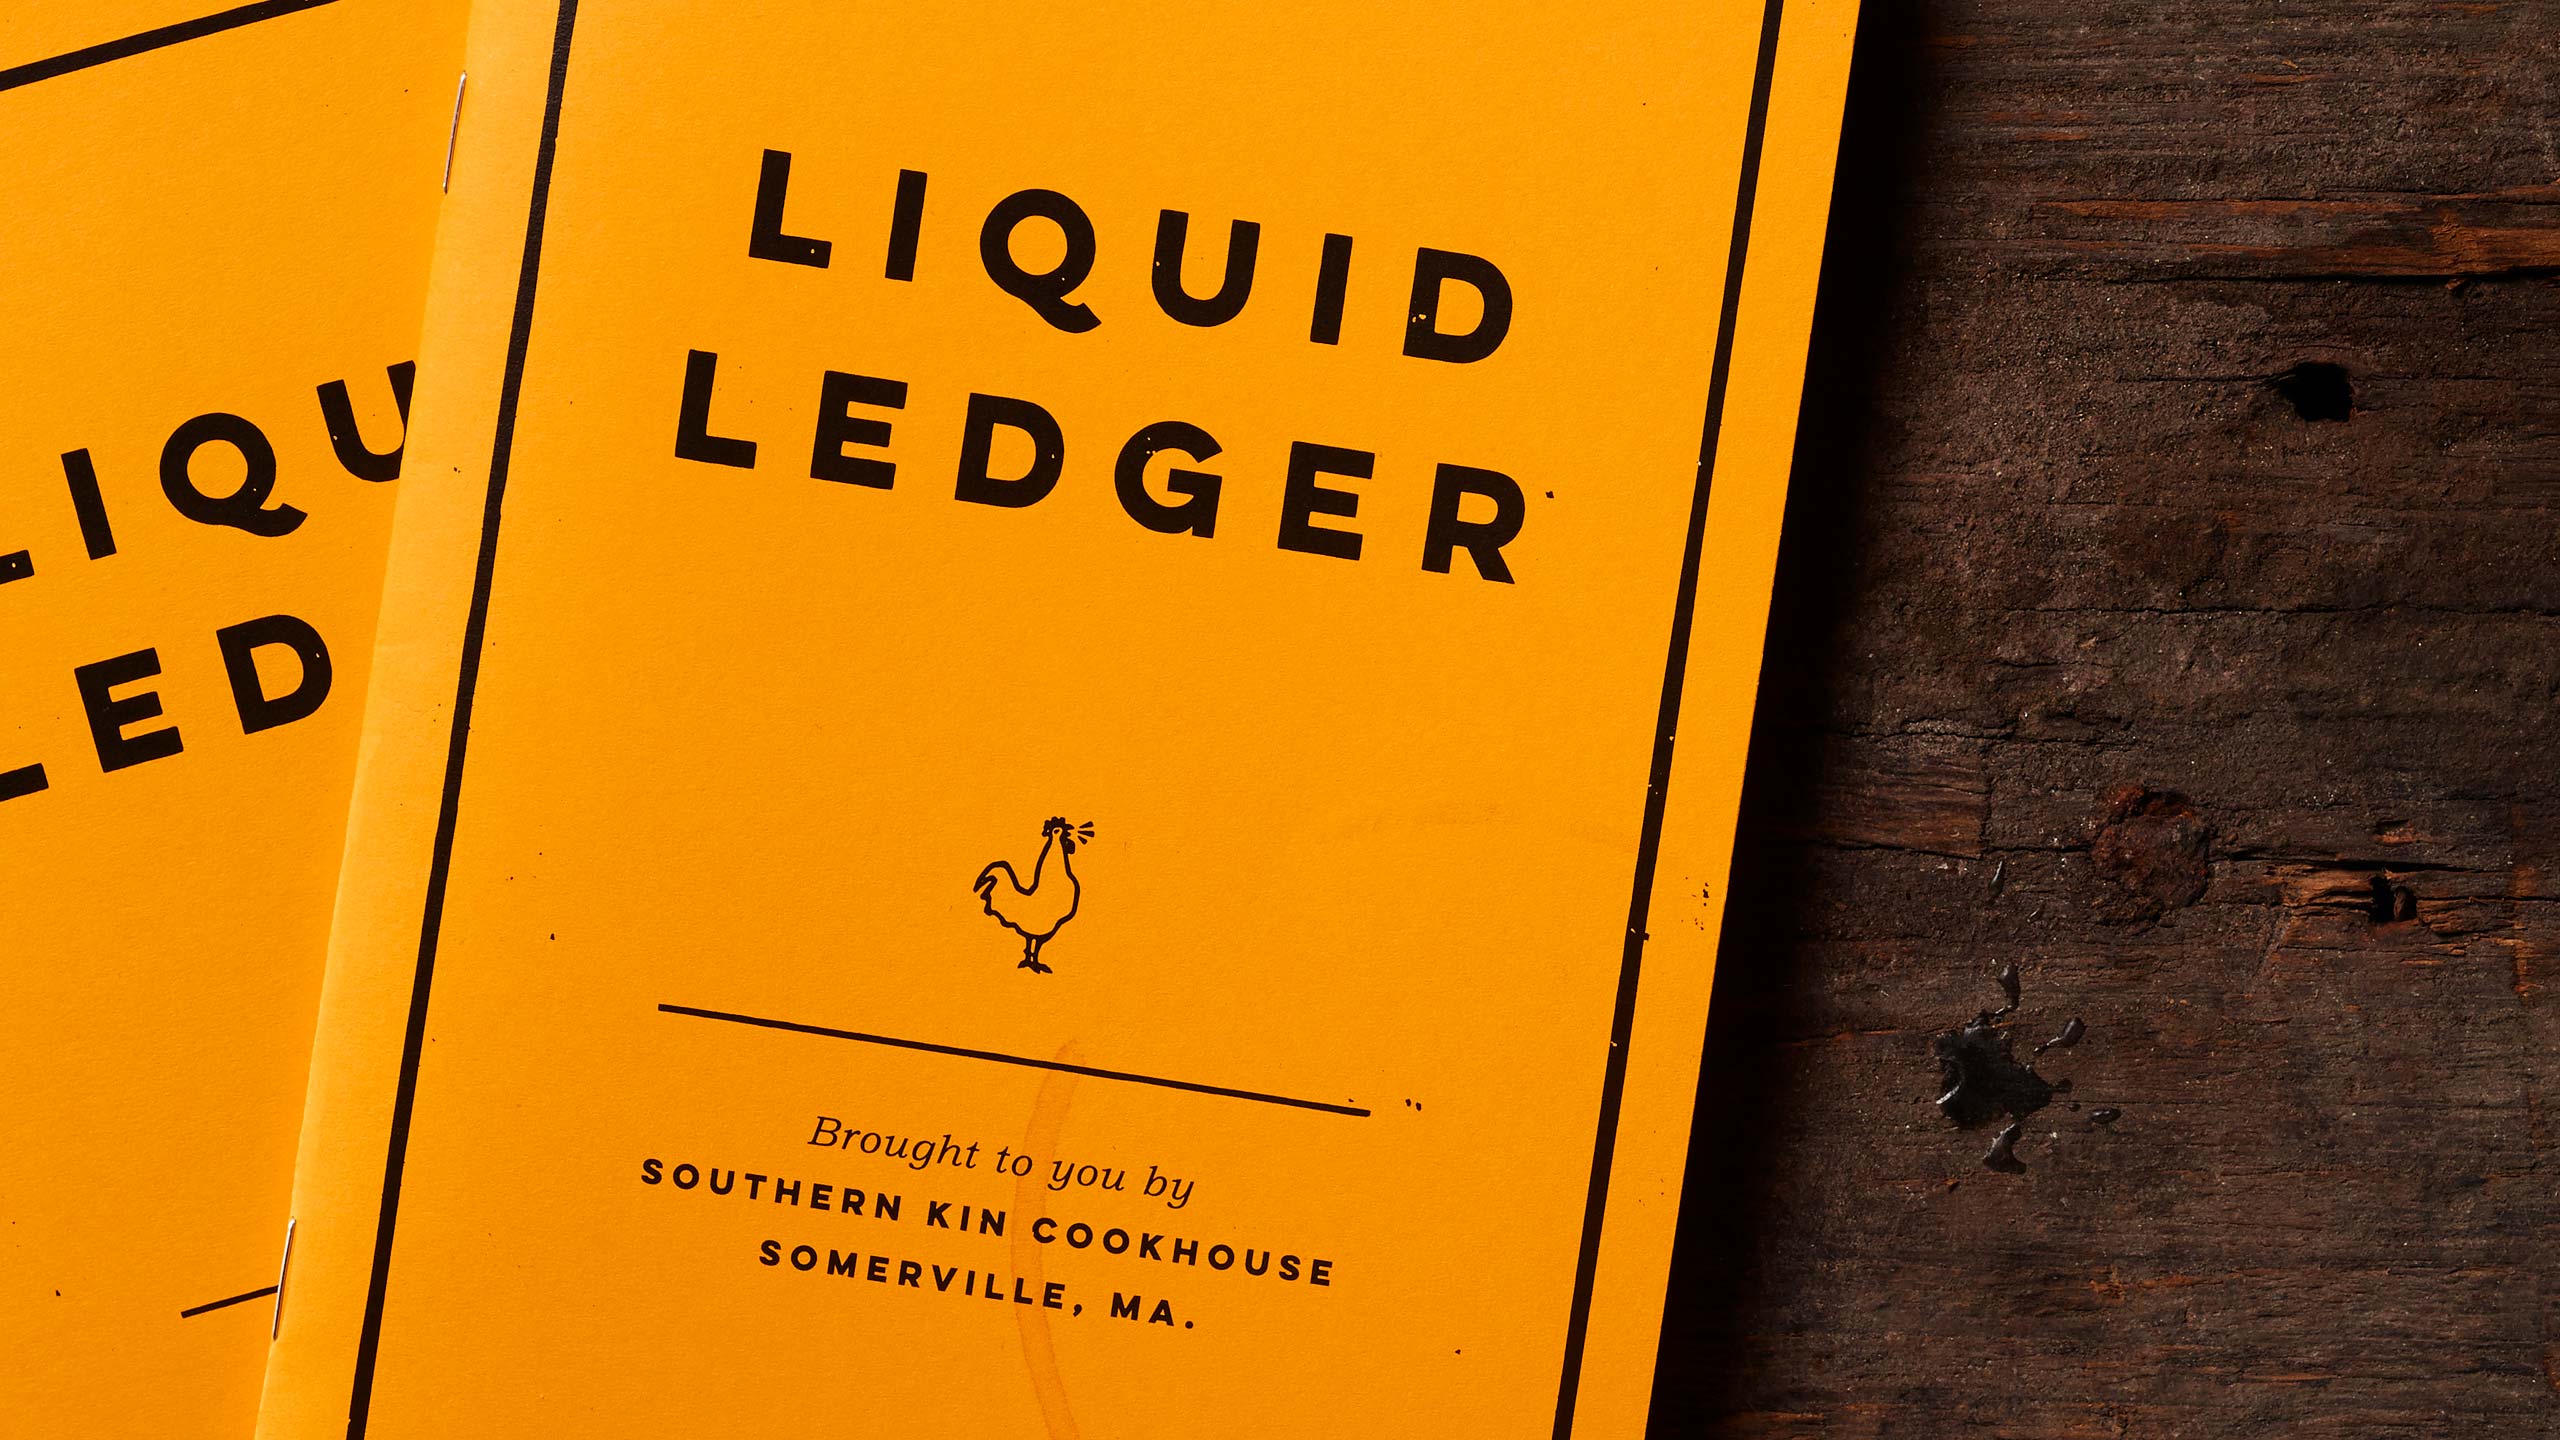 Southern Kin Cookhouse Liquid Ledger cover detail